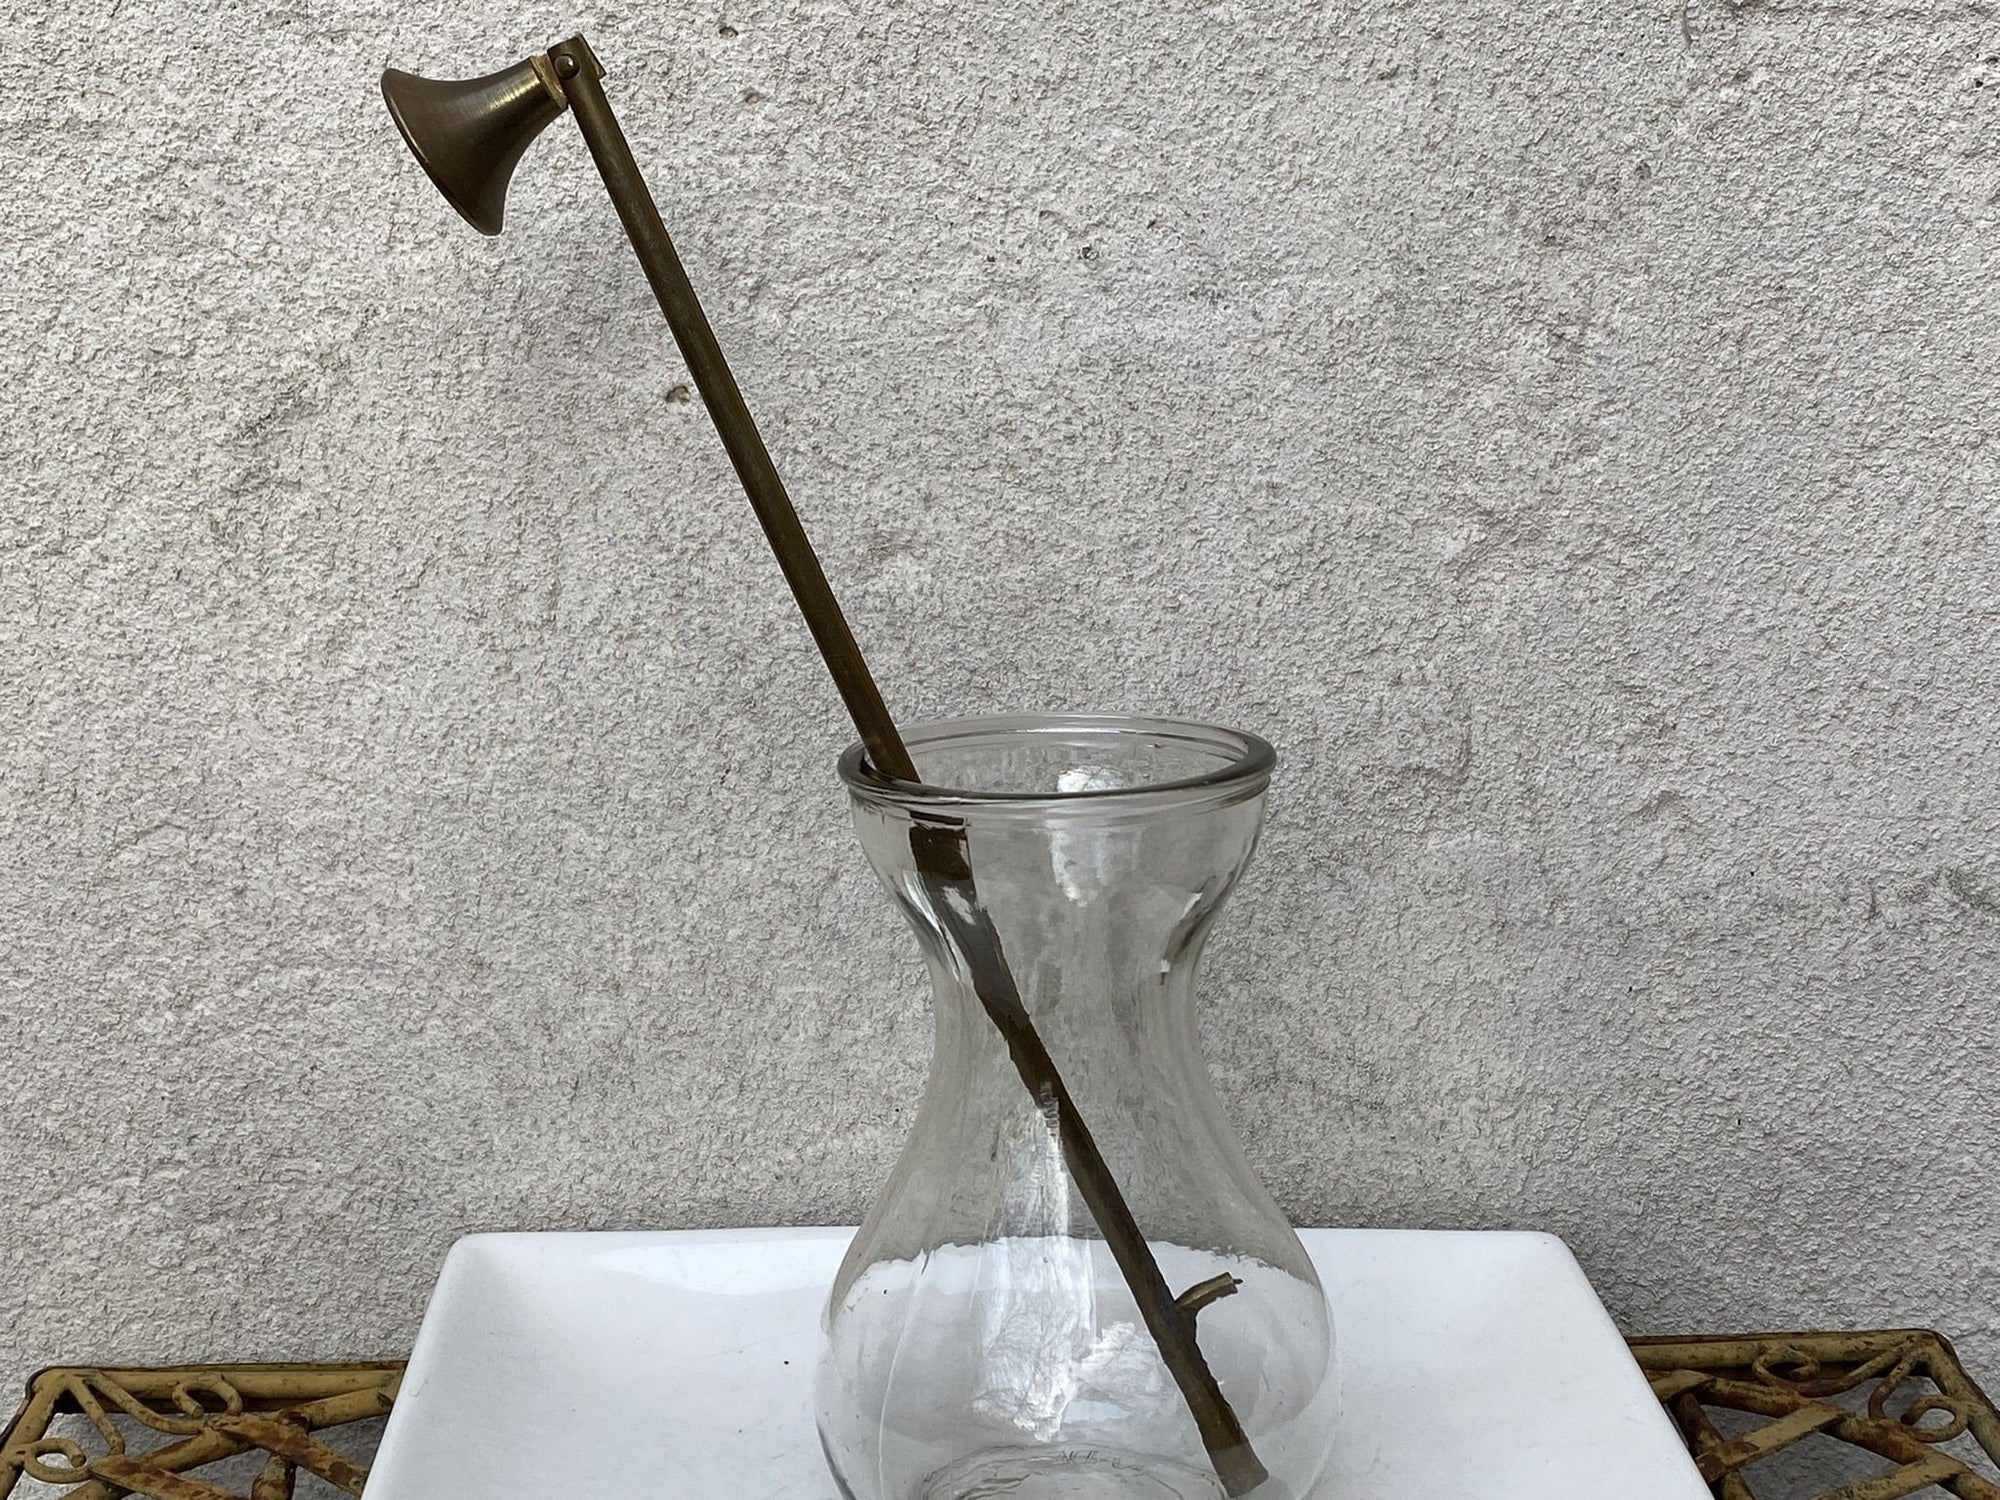 I Like Mike's Mid Century Modern Candle Snuffers Brass Candle Snuffer with Small Cap and 11" Reach